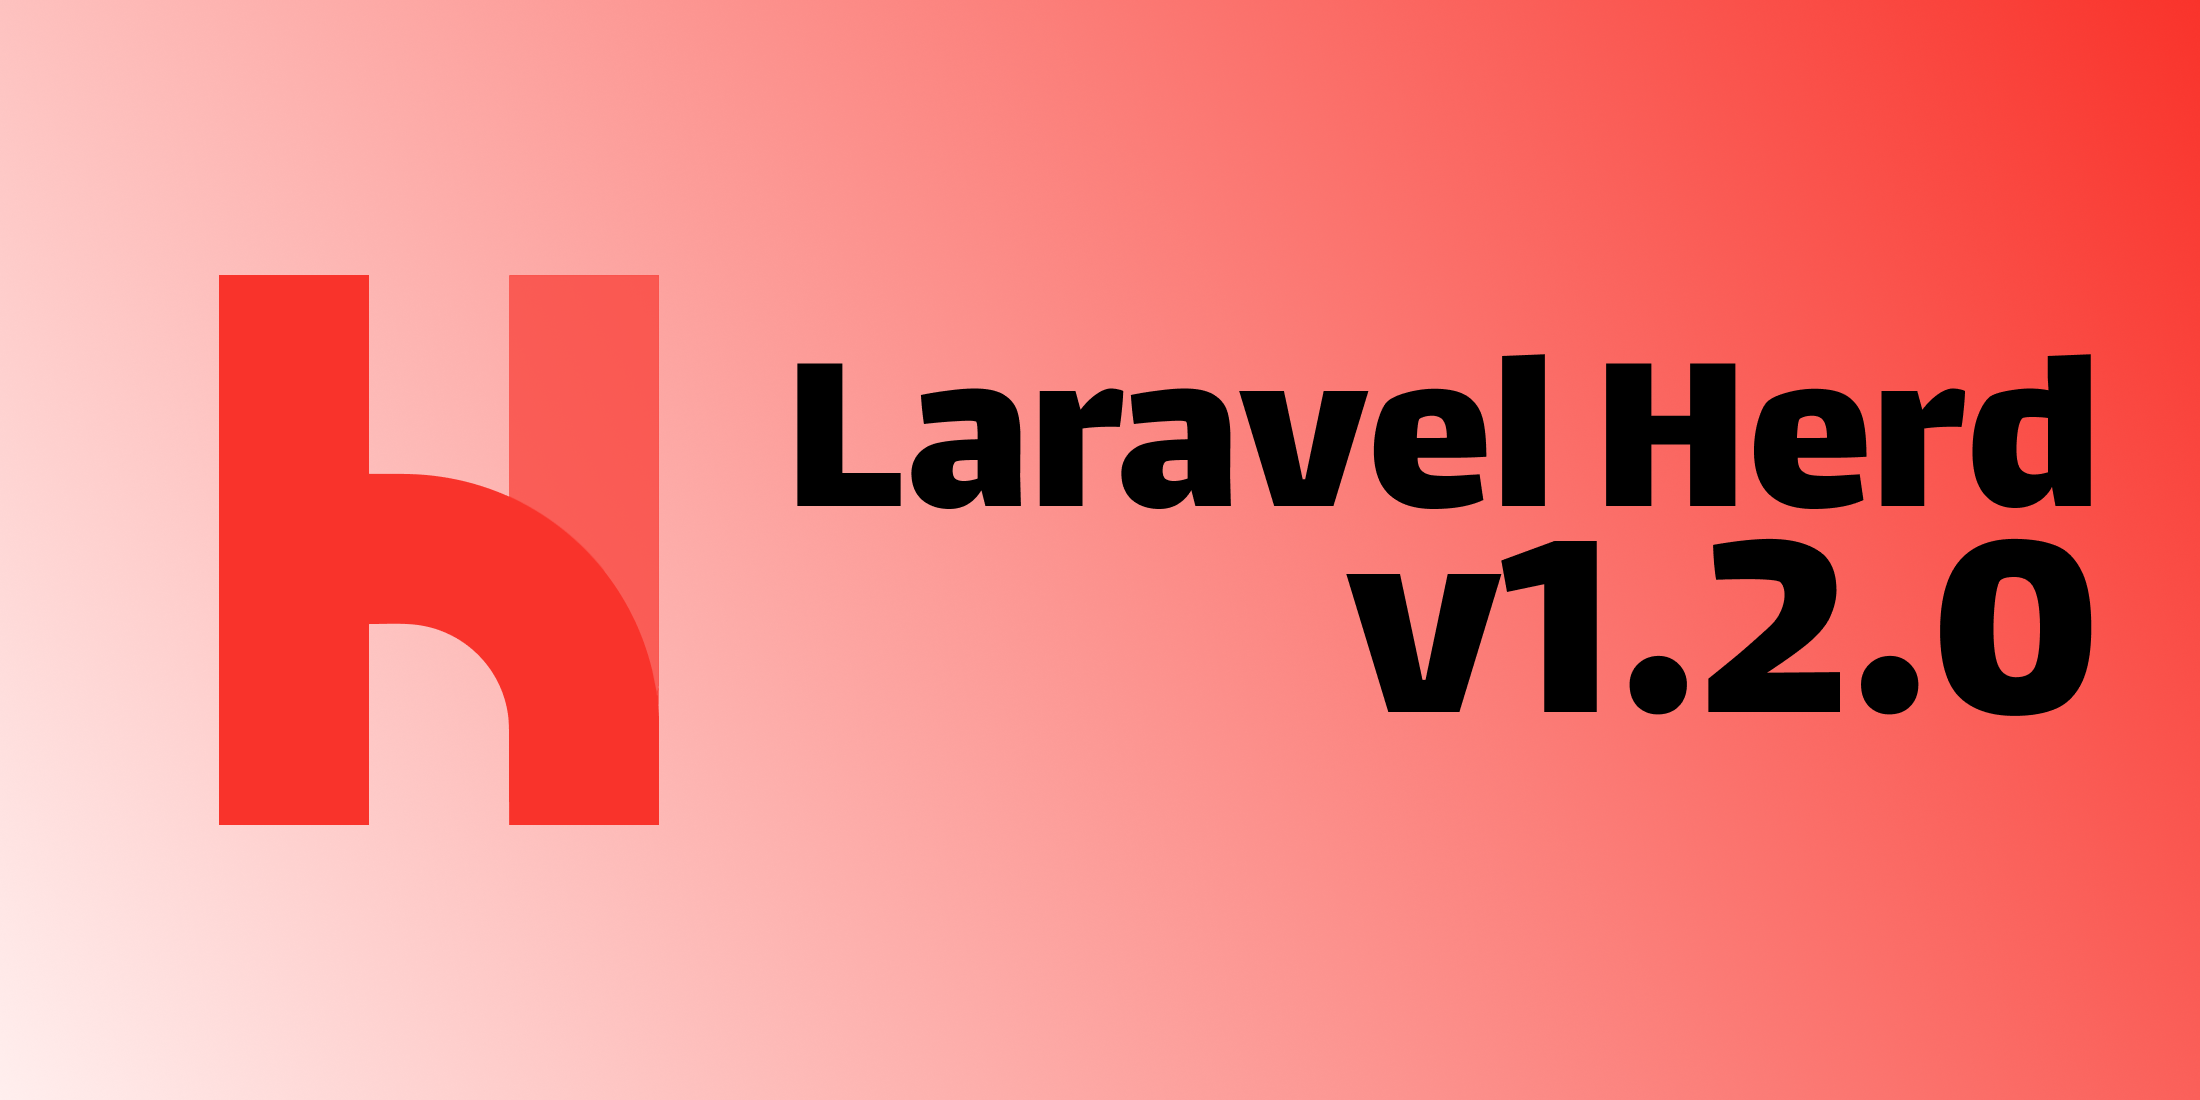 Laravel Herd v1.2.0 includes an App Creation Wizard, Tinkerwell integration, and more image